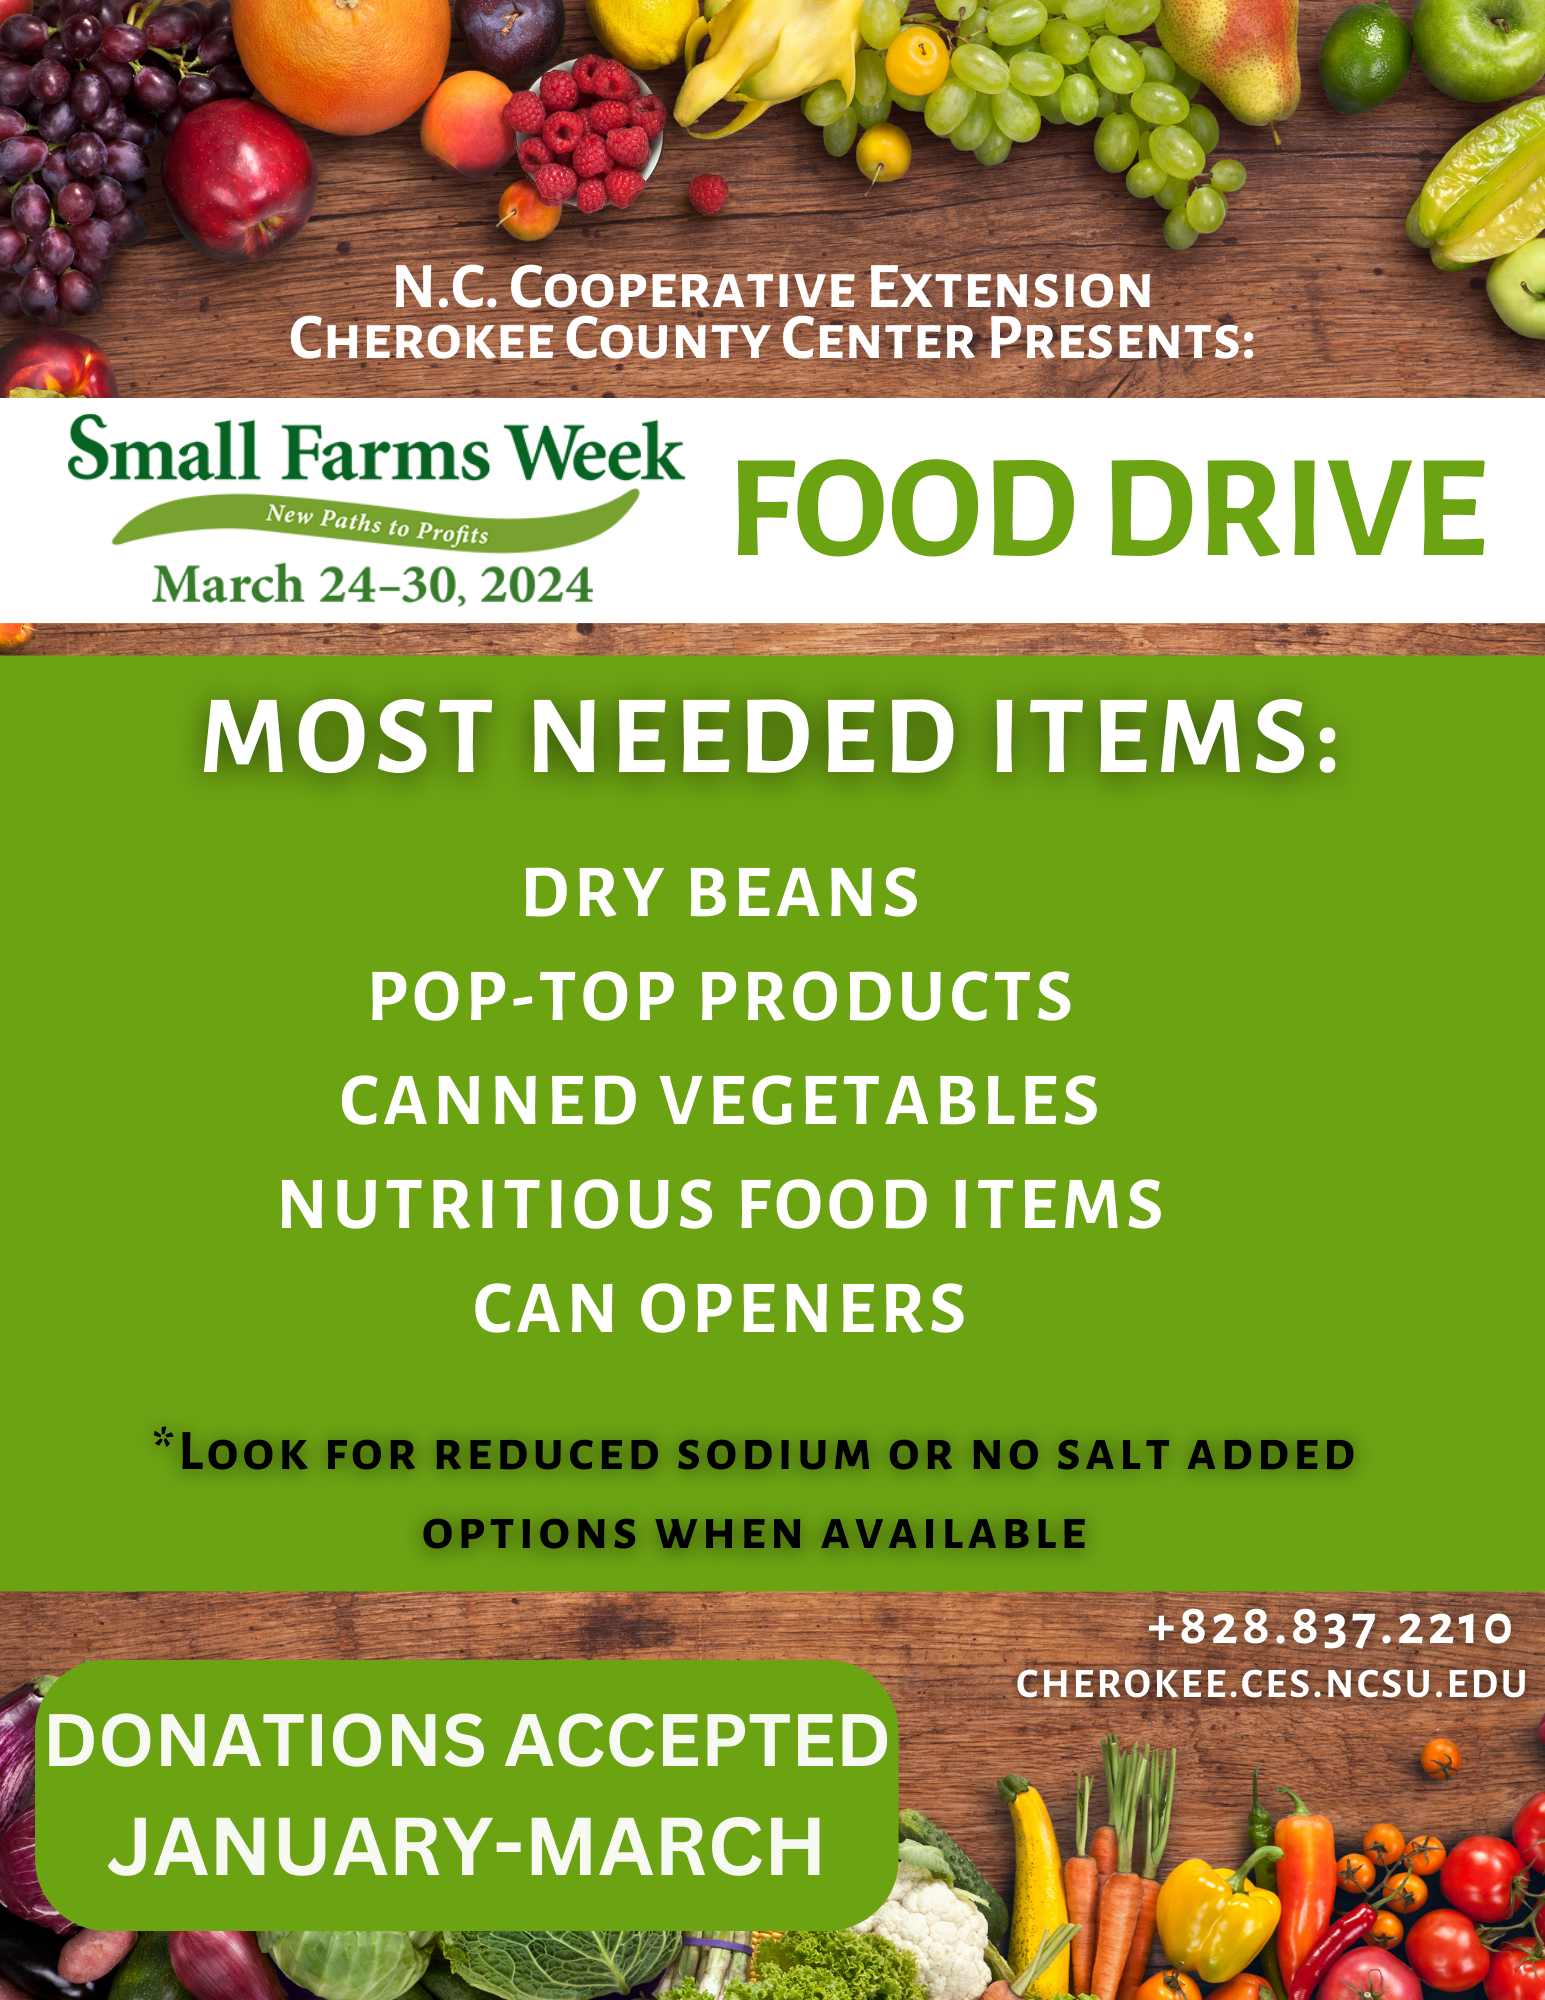 Food Drive: Most Needed Items